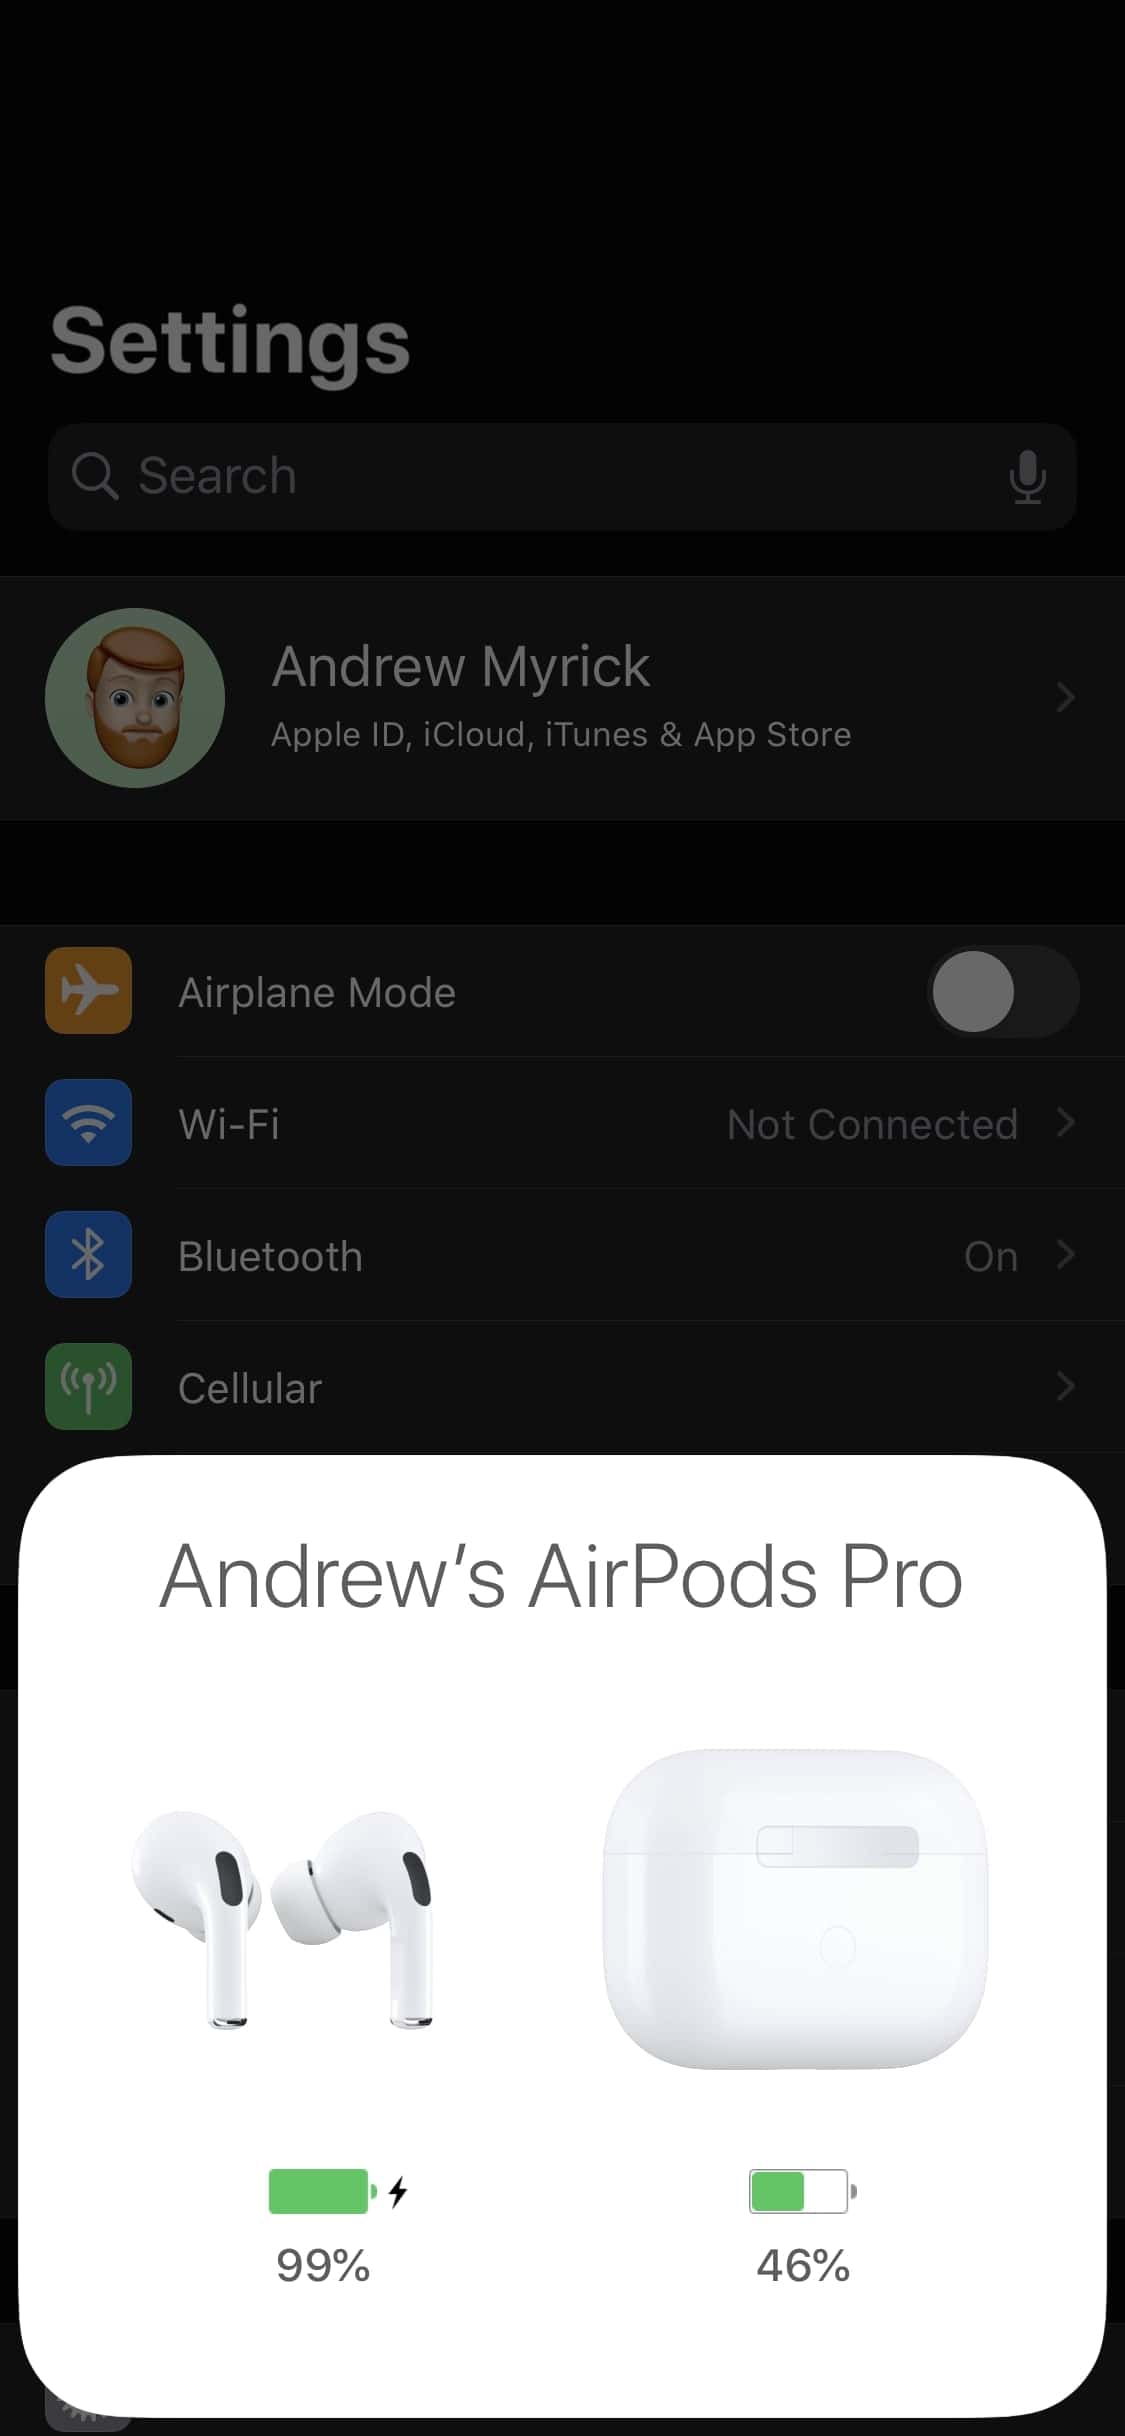 forord hjul grådig How to charge your AirPods Pro wirelessly or with the cable - AppleToolBox